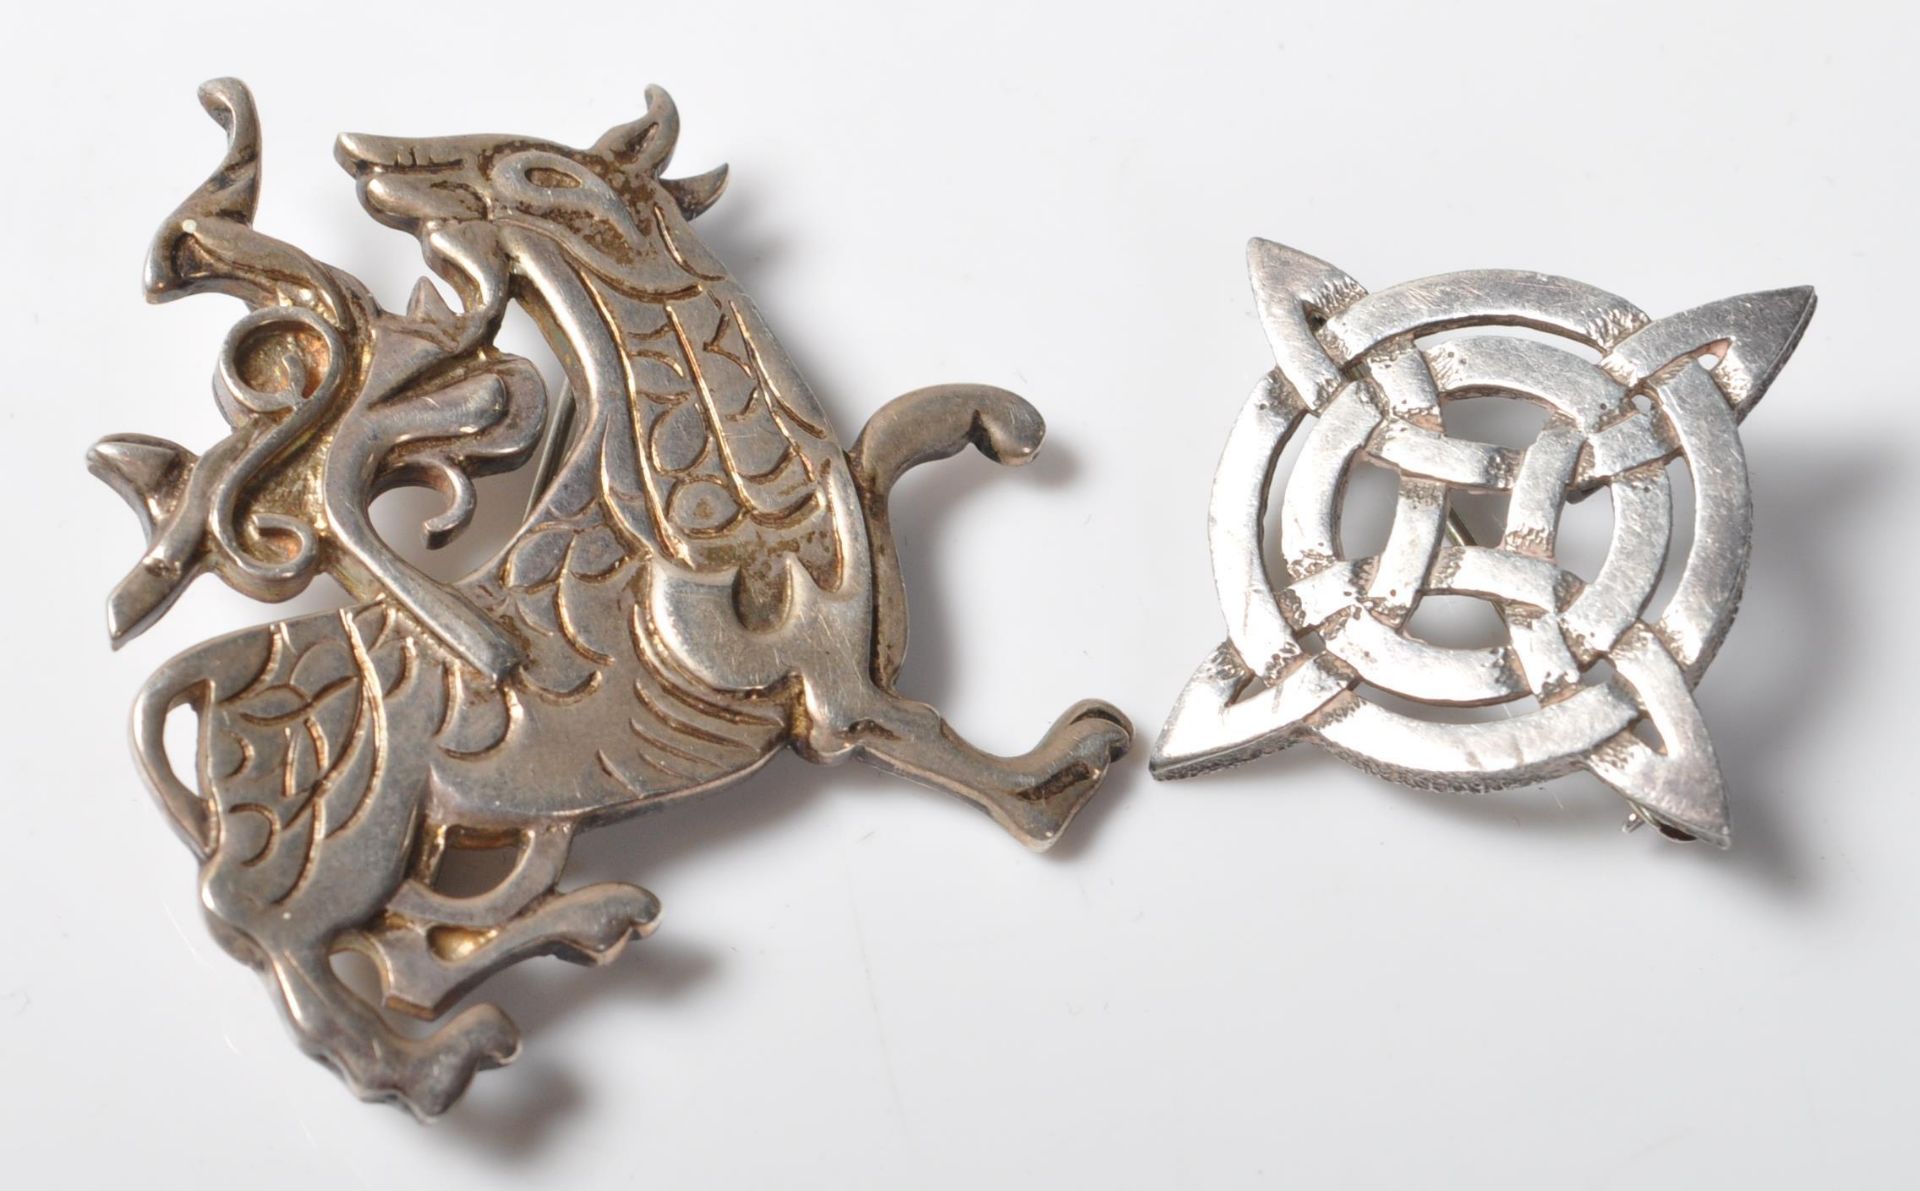 TWO OLA M GORIE SCOTTISH SILVER BROOCHES